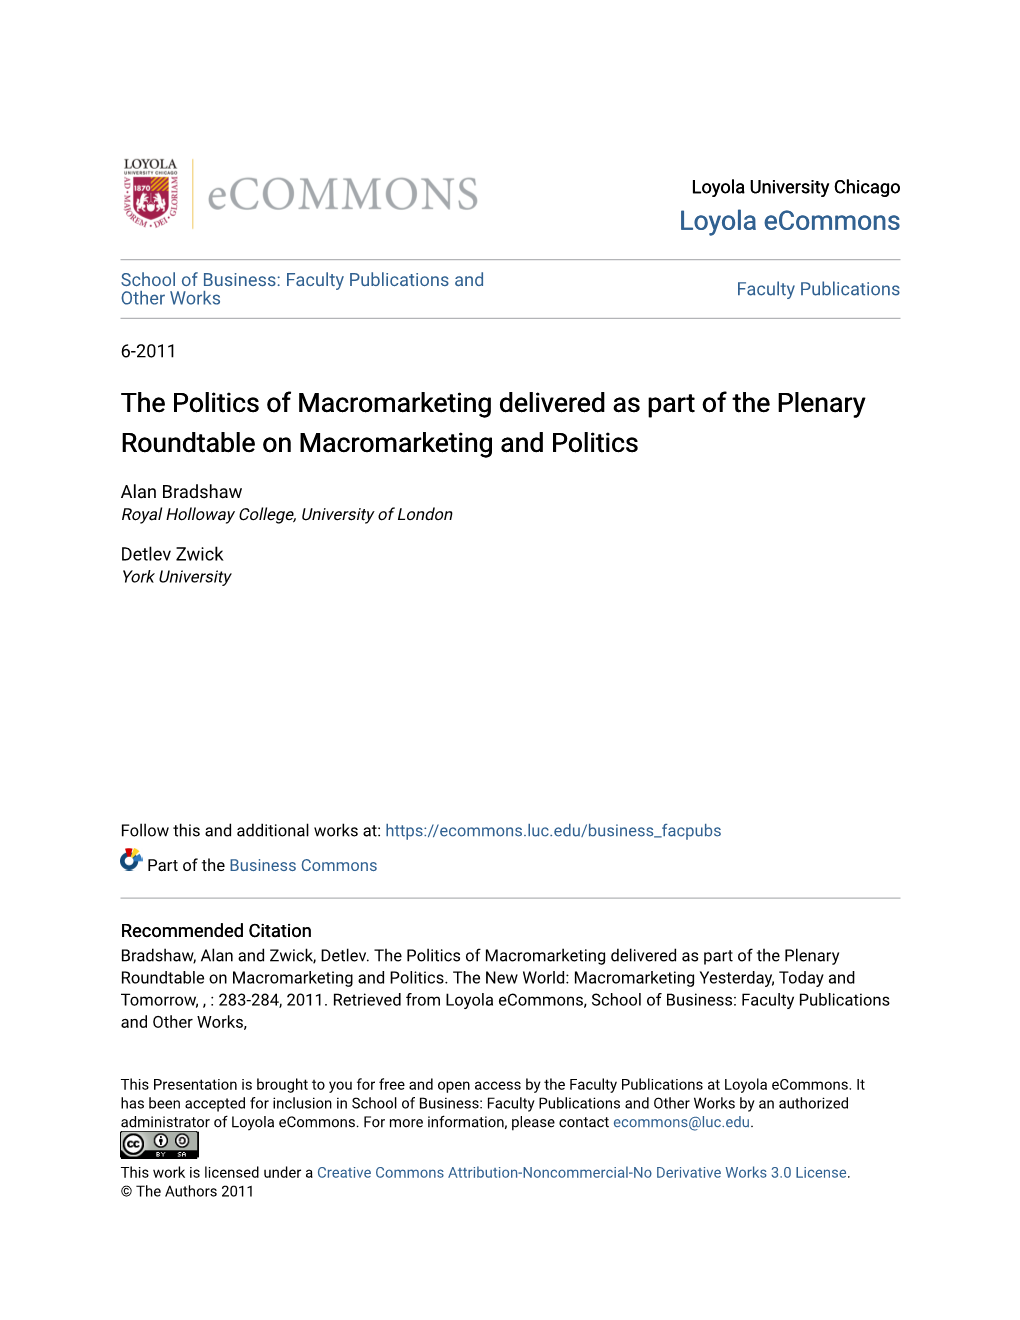 The Politics of Macromarketing Delivered As Part of the Plenary Roundtable on Macromarketing and Politics